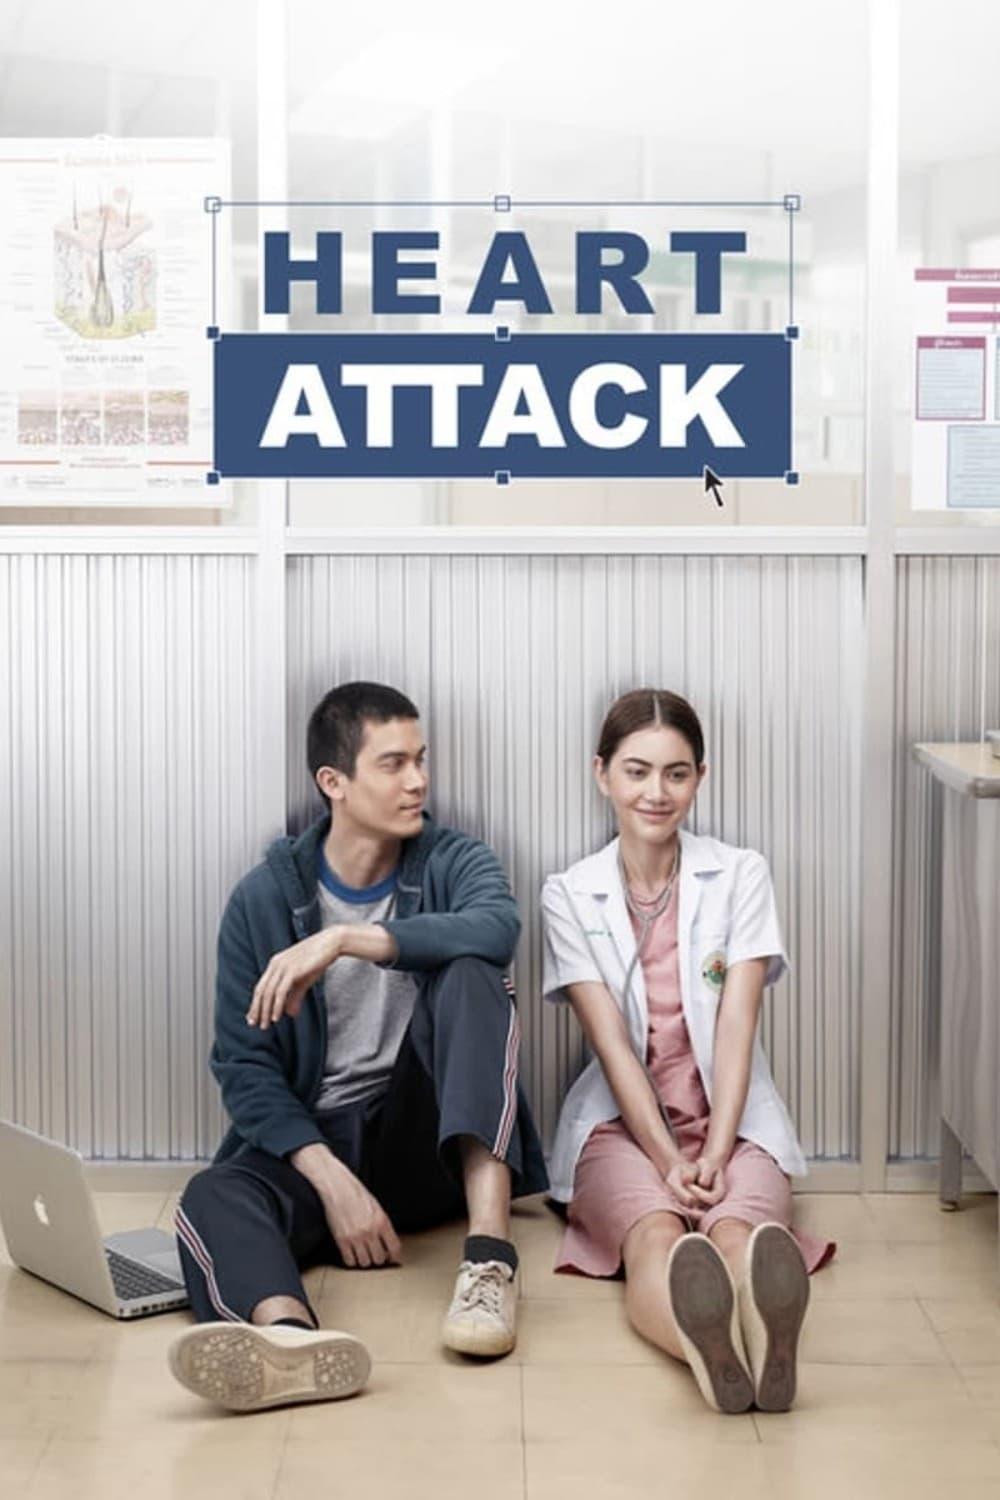 Heart Attack poster